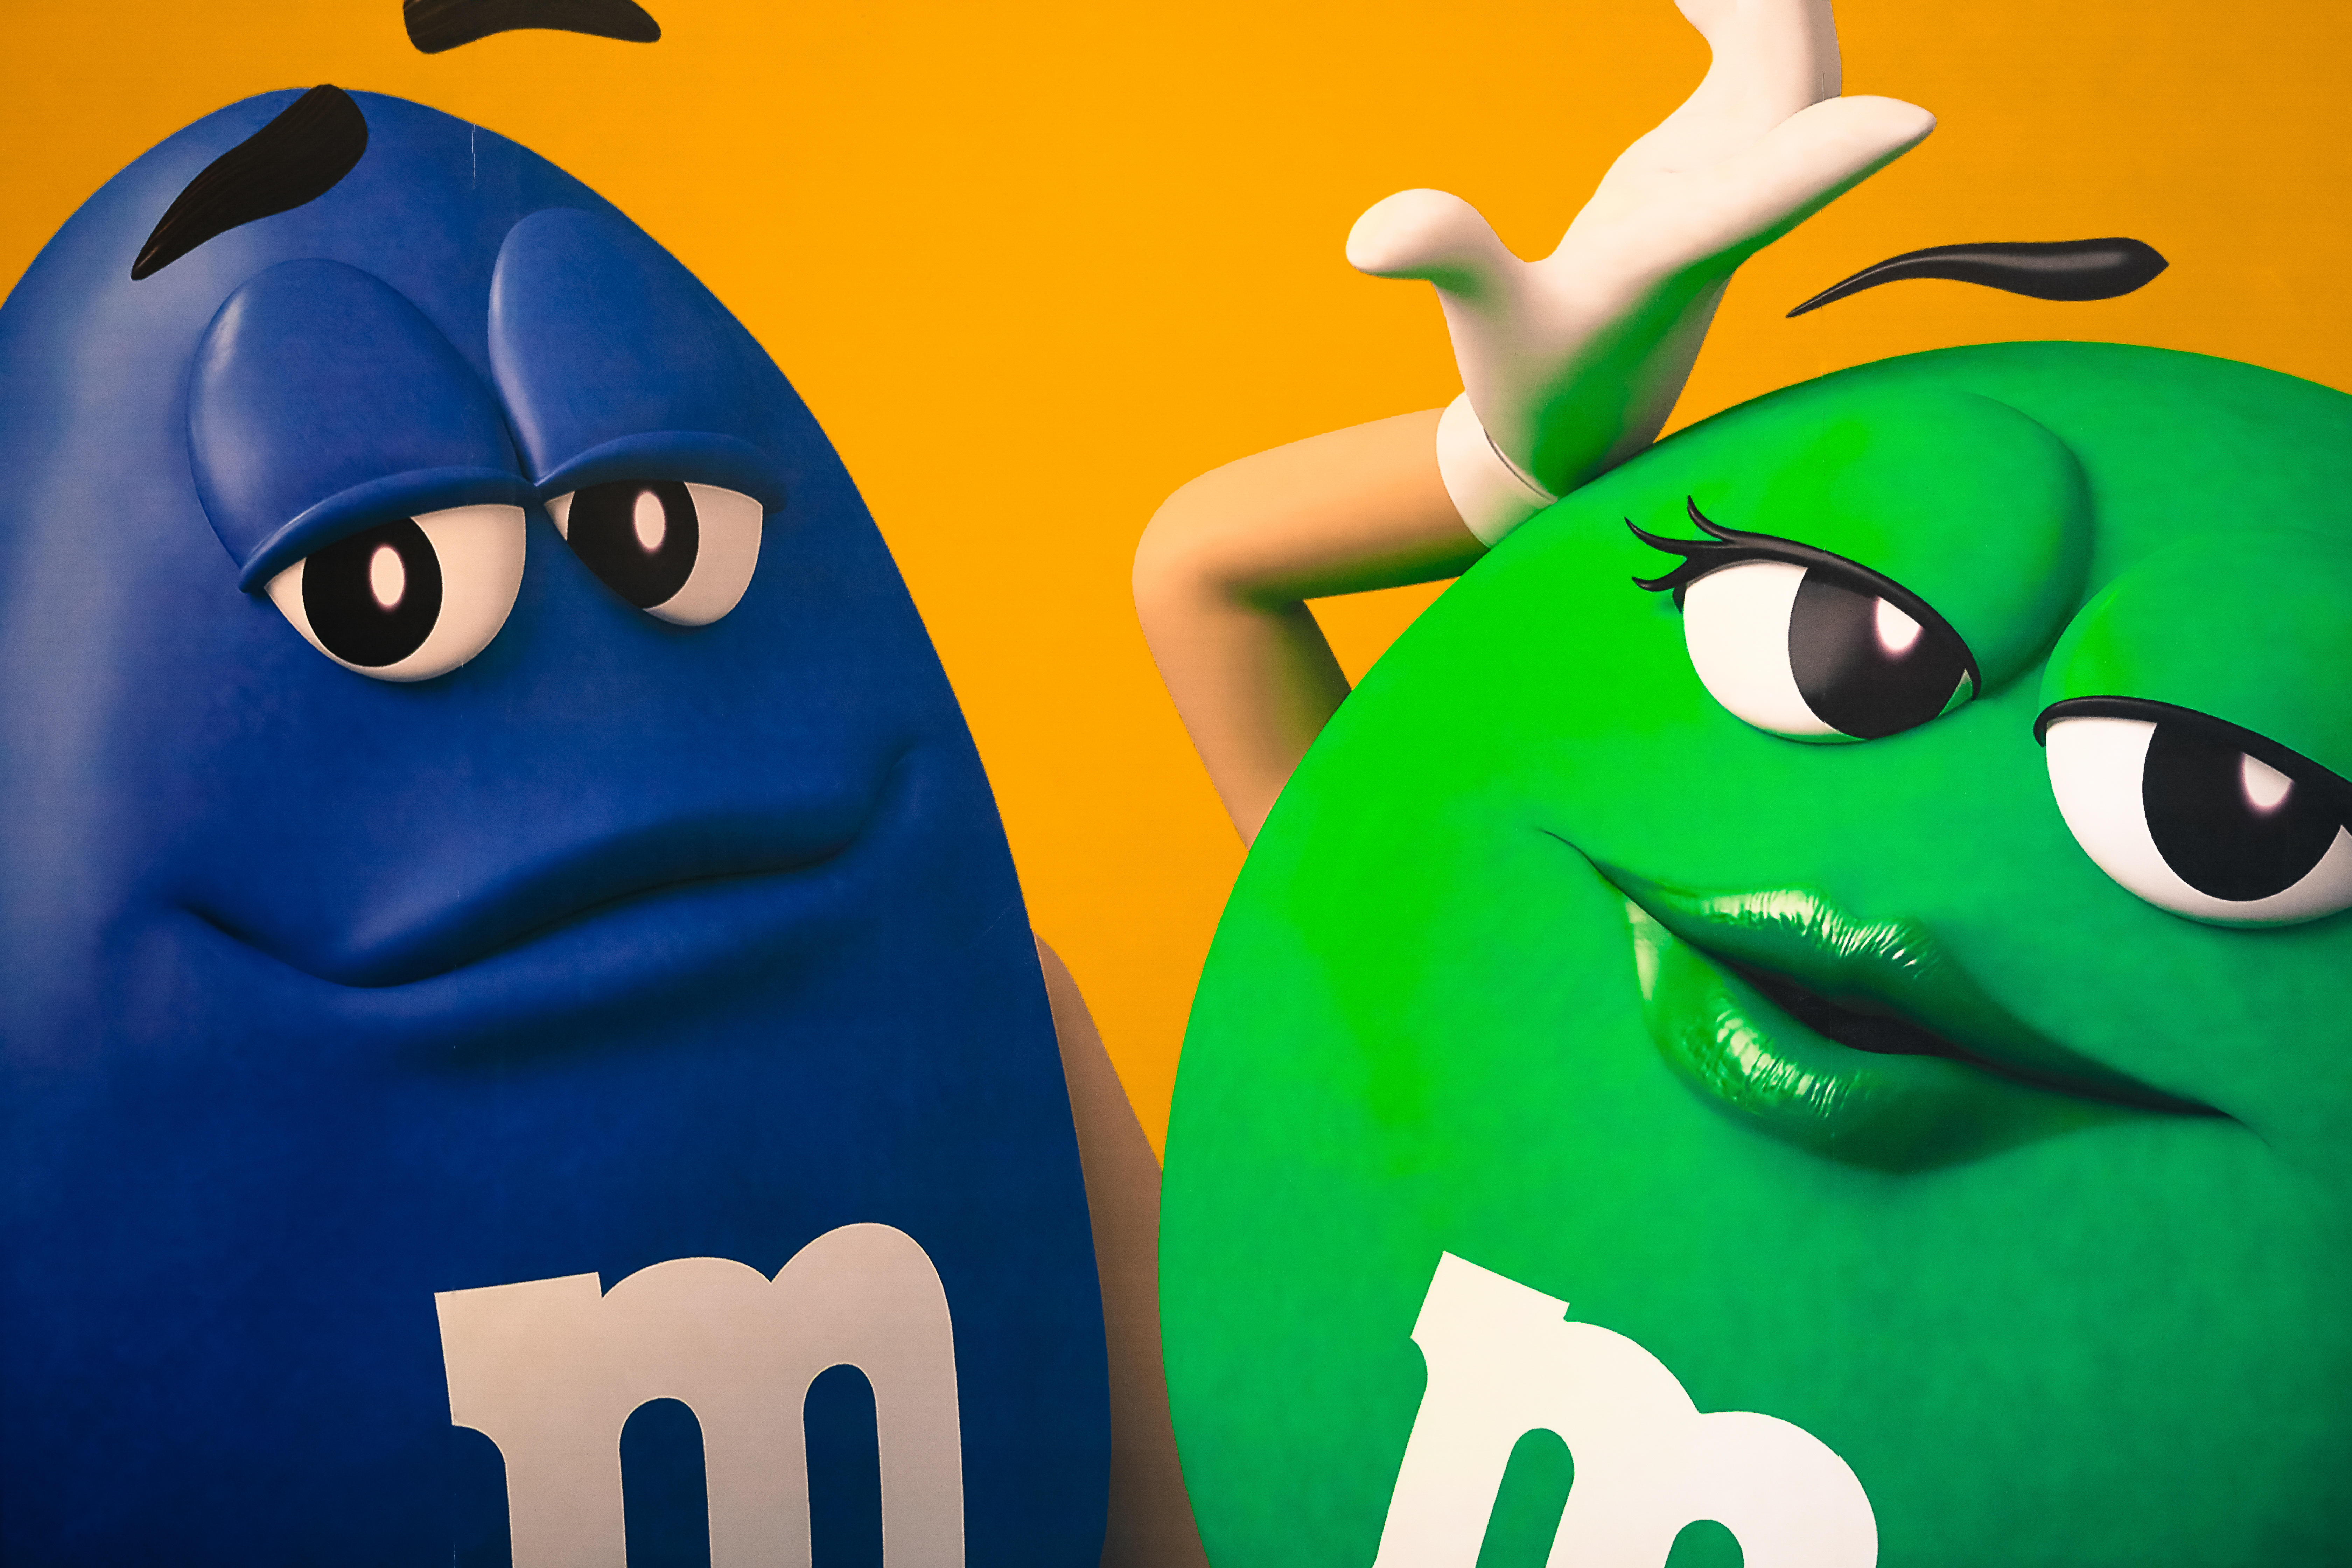 M&Ms characters redesigned for a more dynamic, progressive world, Mars  announces - CBS News